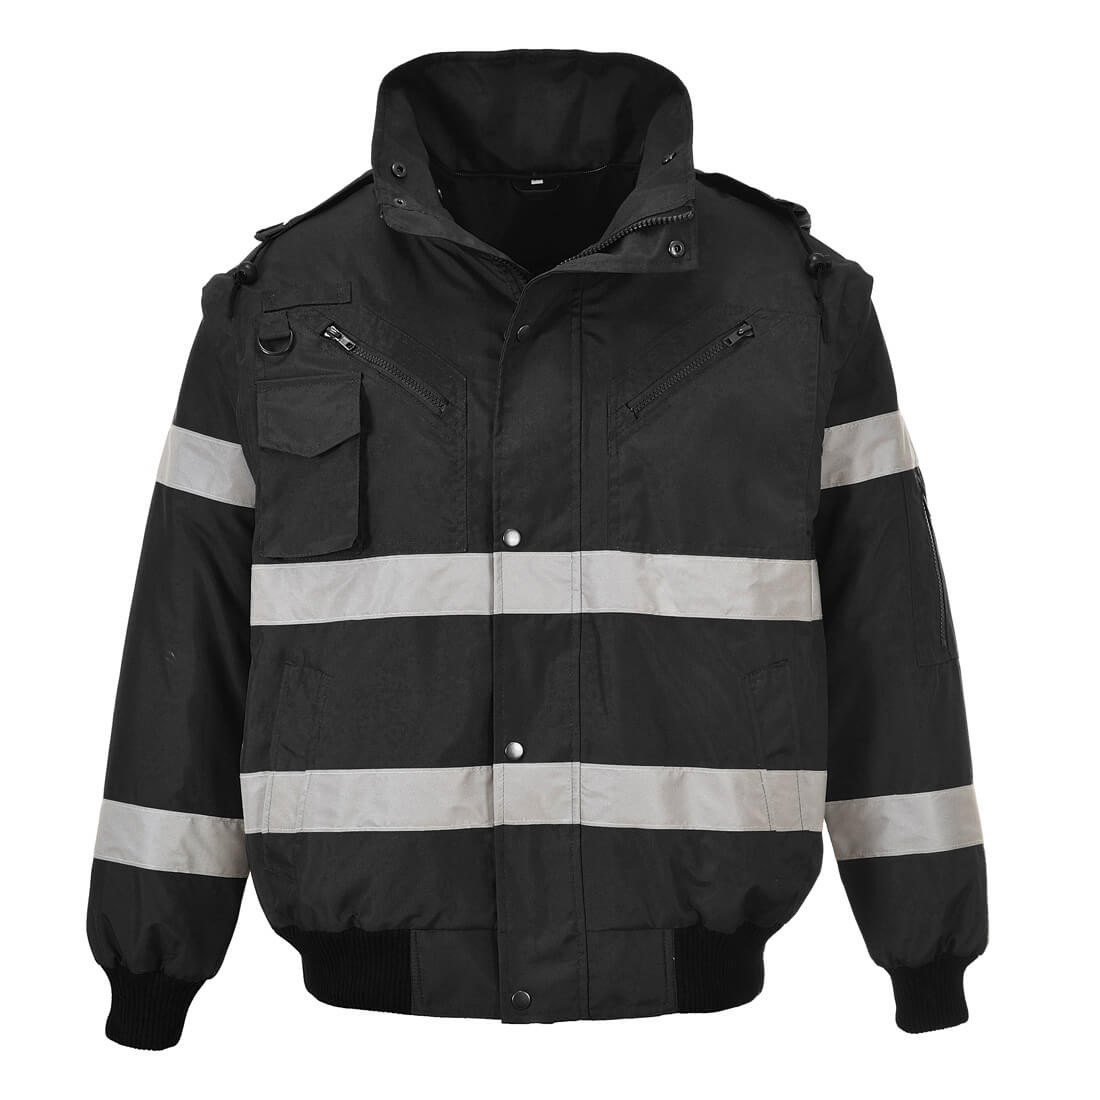 Iona 3 in 1 Bomber Jacket - Safetywear